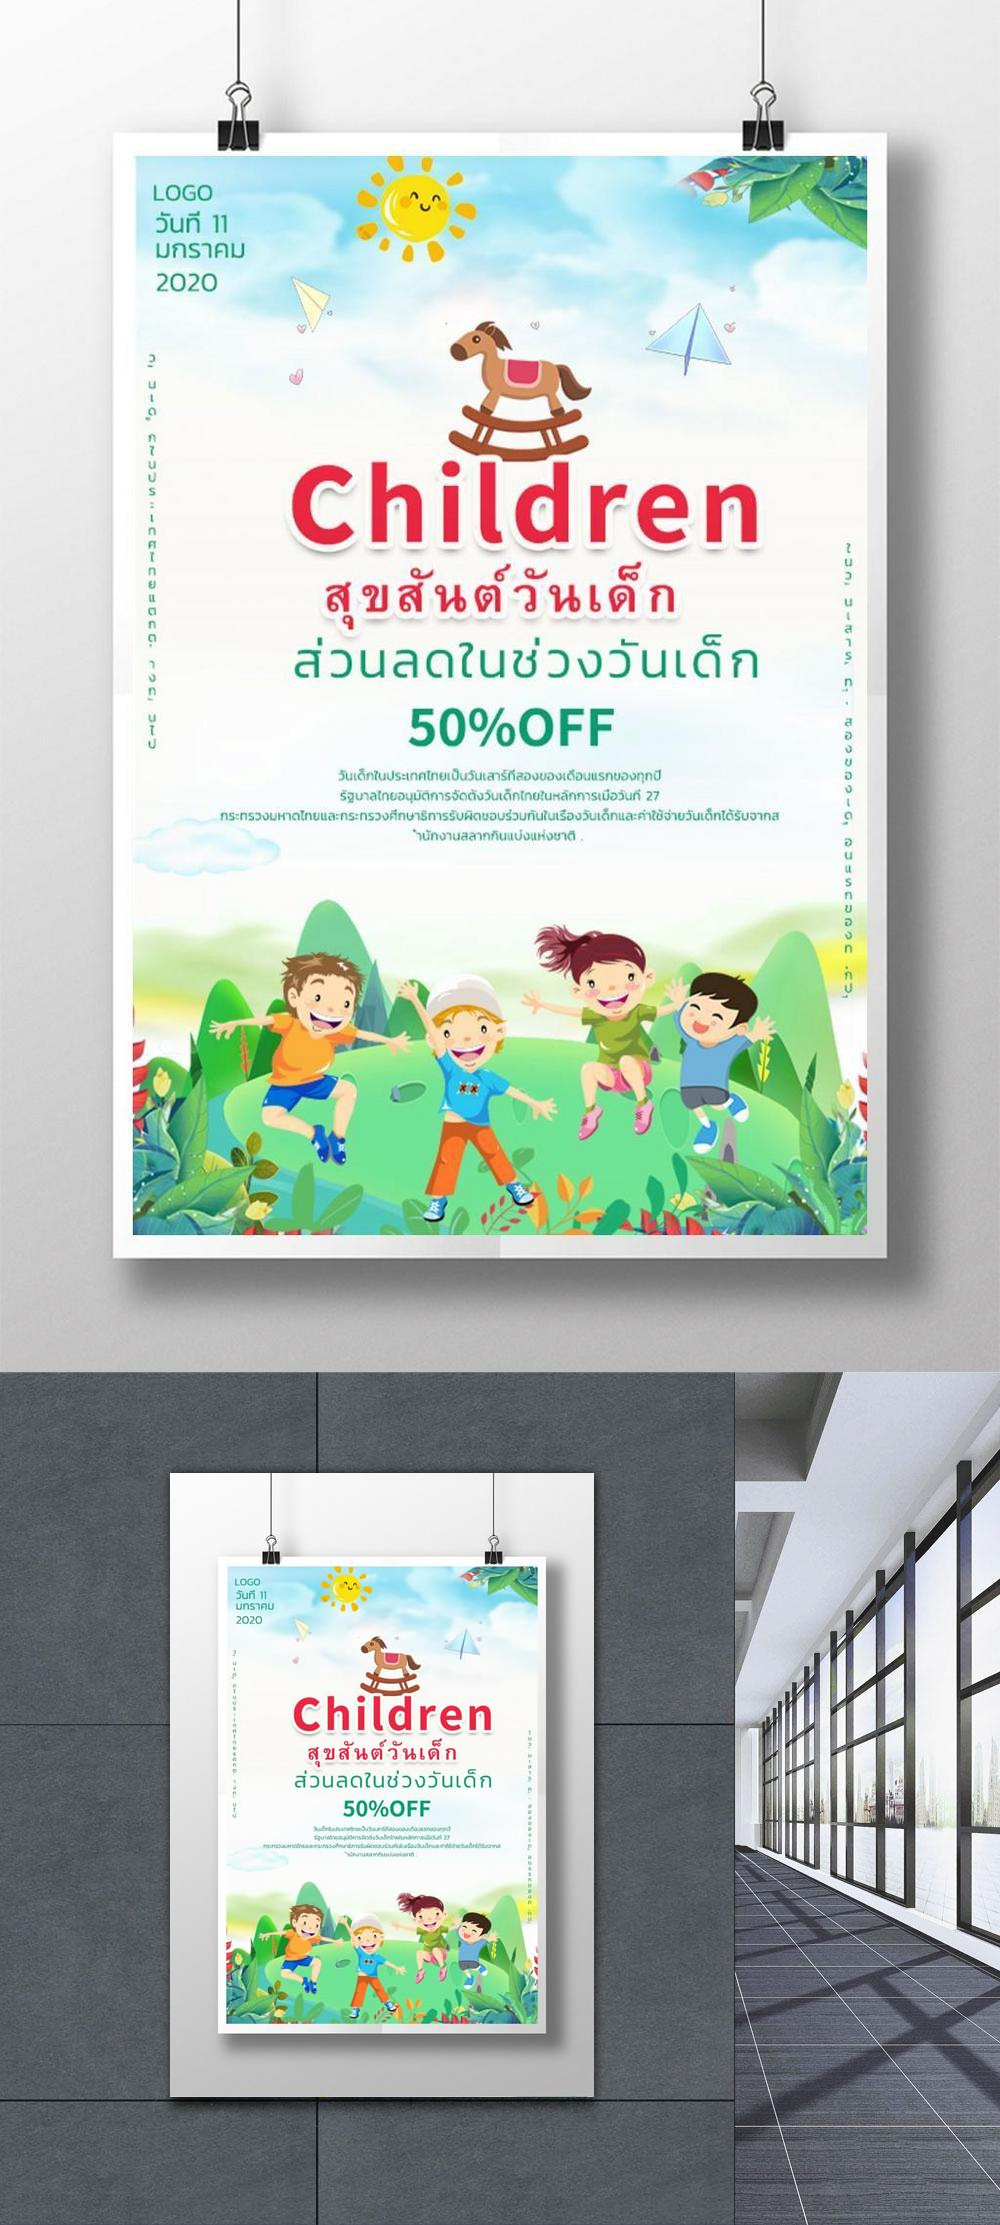 Cartoon poster template image_picture free download 450020482_lovepik.com